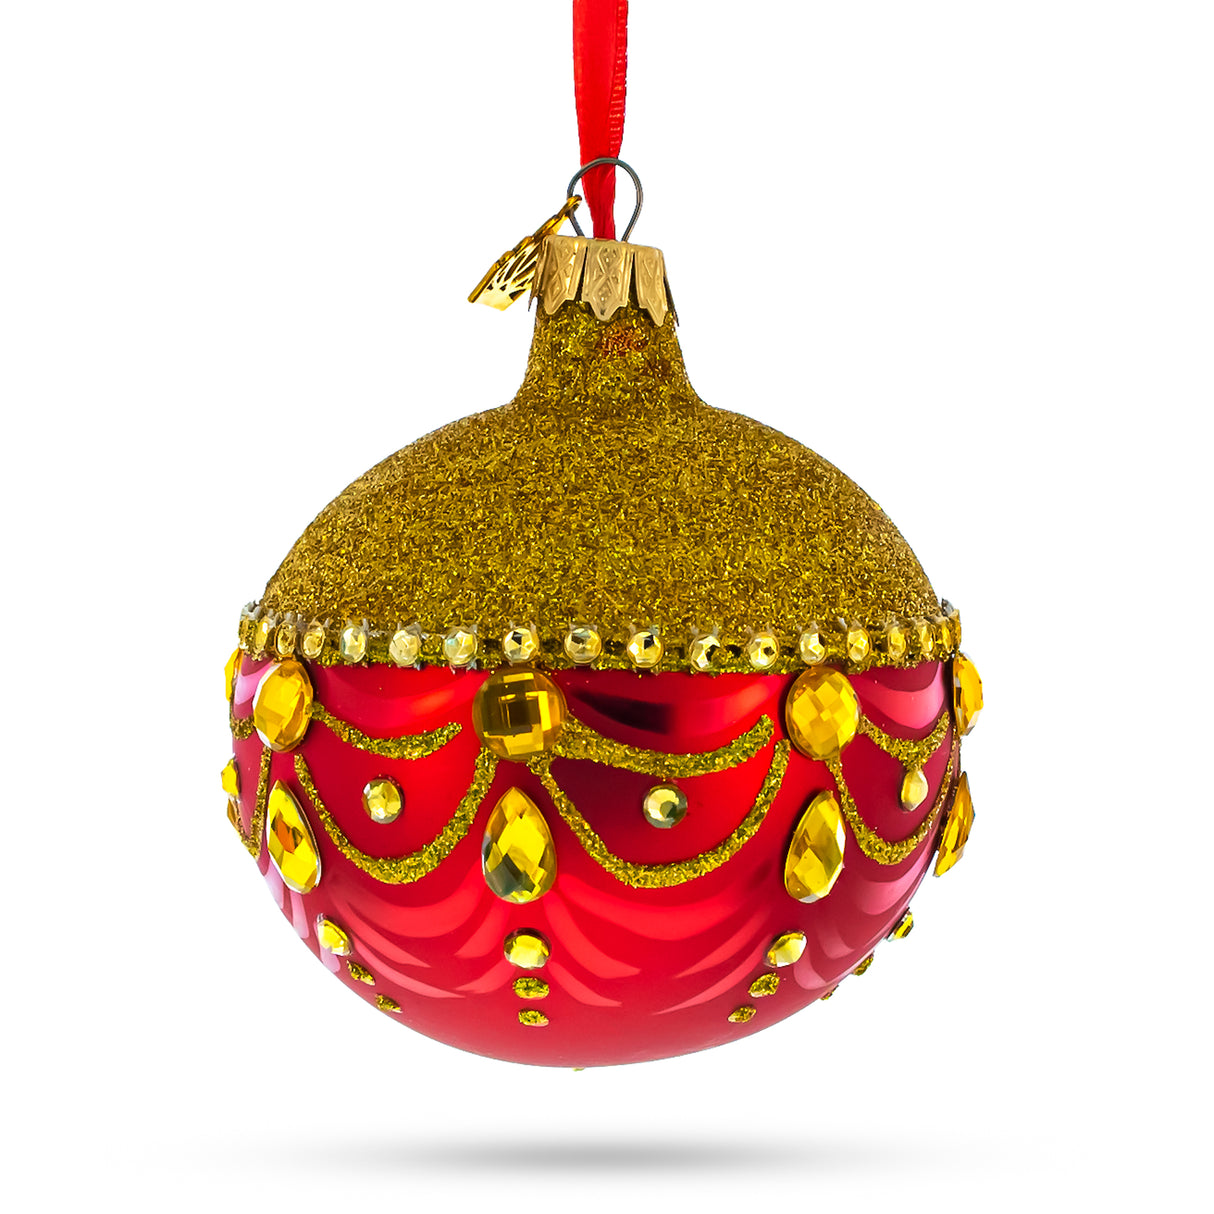 Radiant Elegance: Glittered Golden Top Red Bottom Blown Glass Ball Christmas Ornament 3.25 Inches in Red color, Round shape